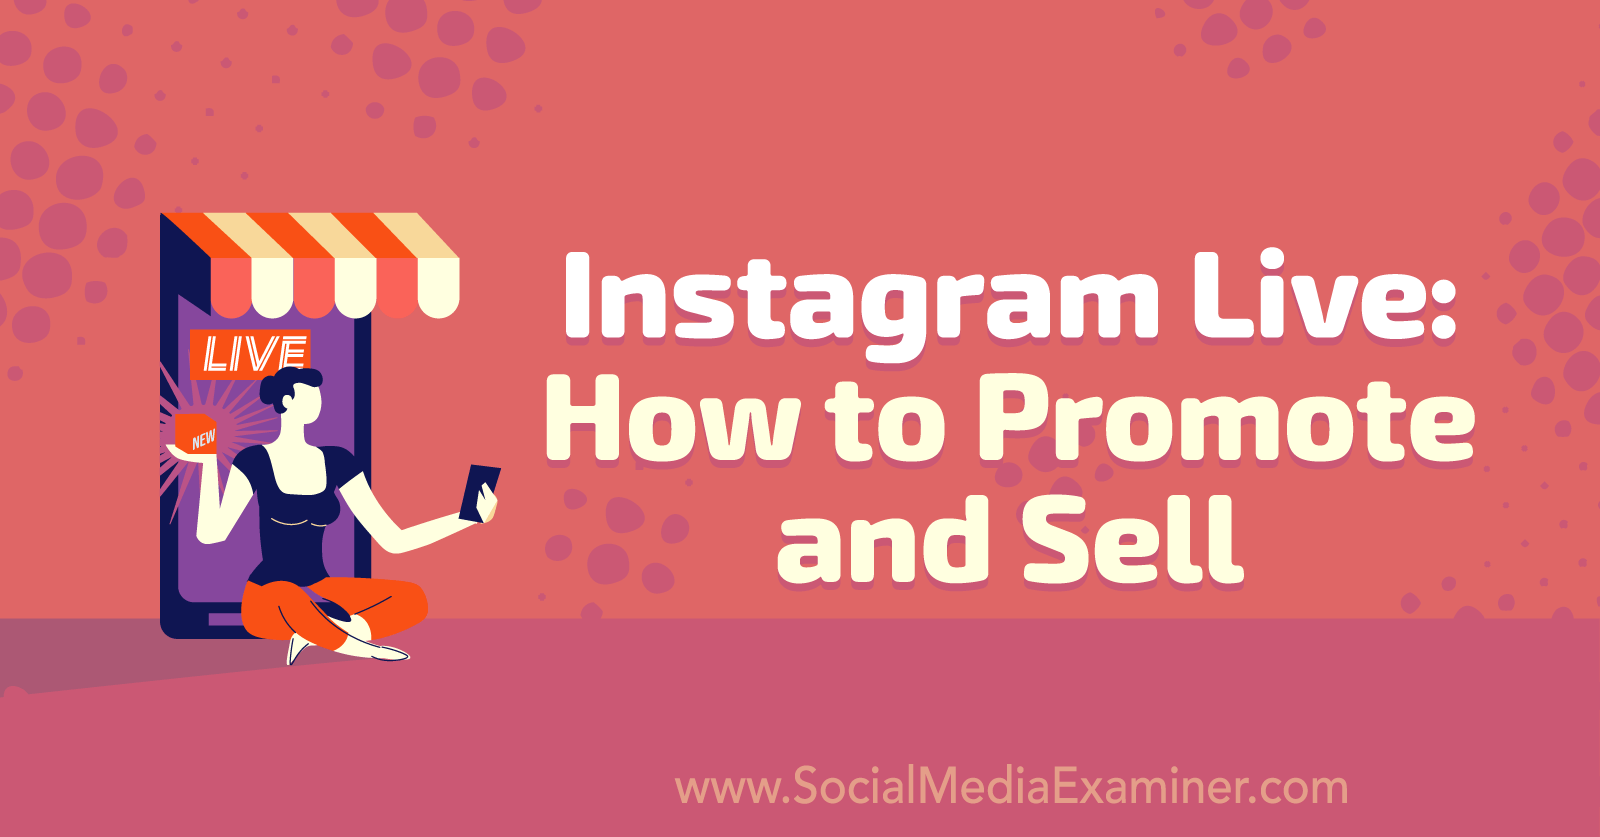 Instagram Live: How to Promote and Sell featuring insights from Nicky Saunders on the Social Media Marketing Podcast.